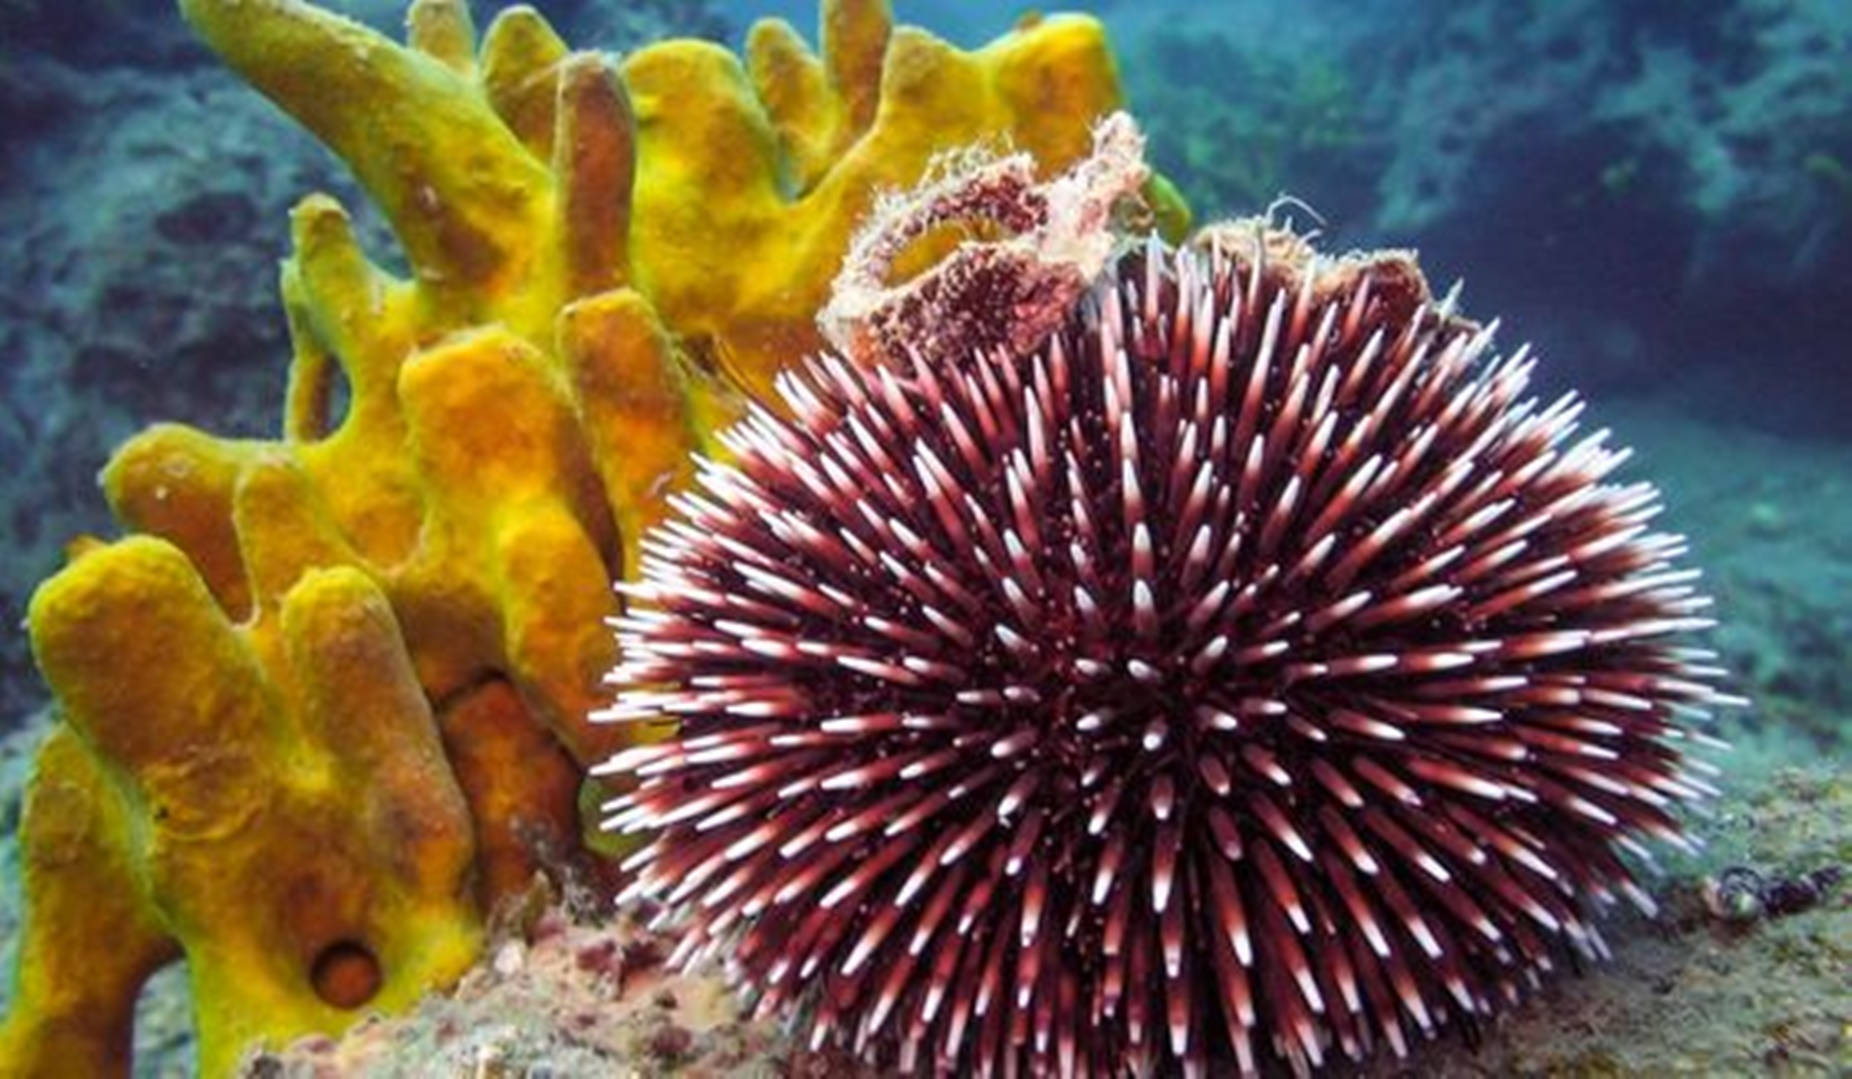 Stunning close-up shot of a white and red sea urchin amidst a coral sponge. Wallpaper